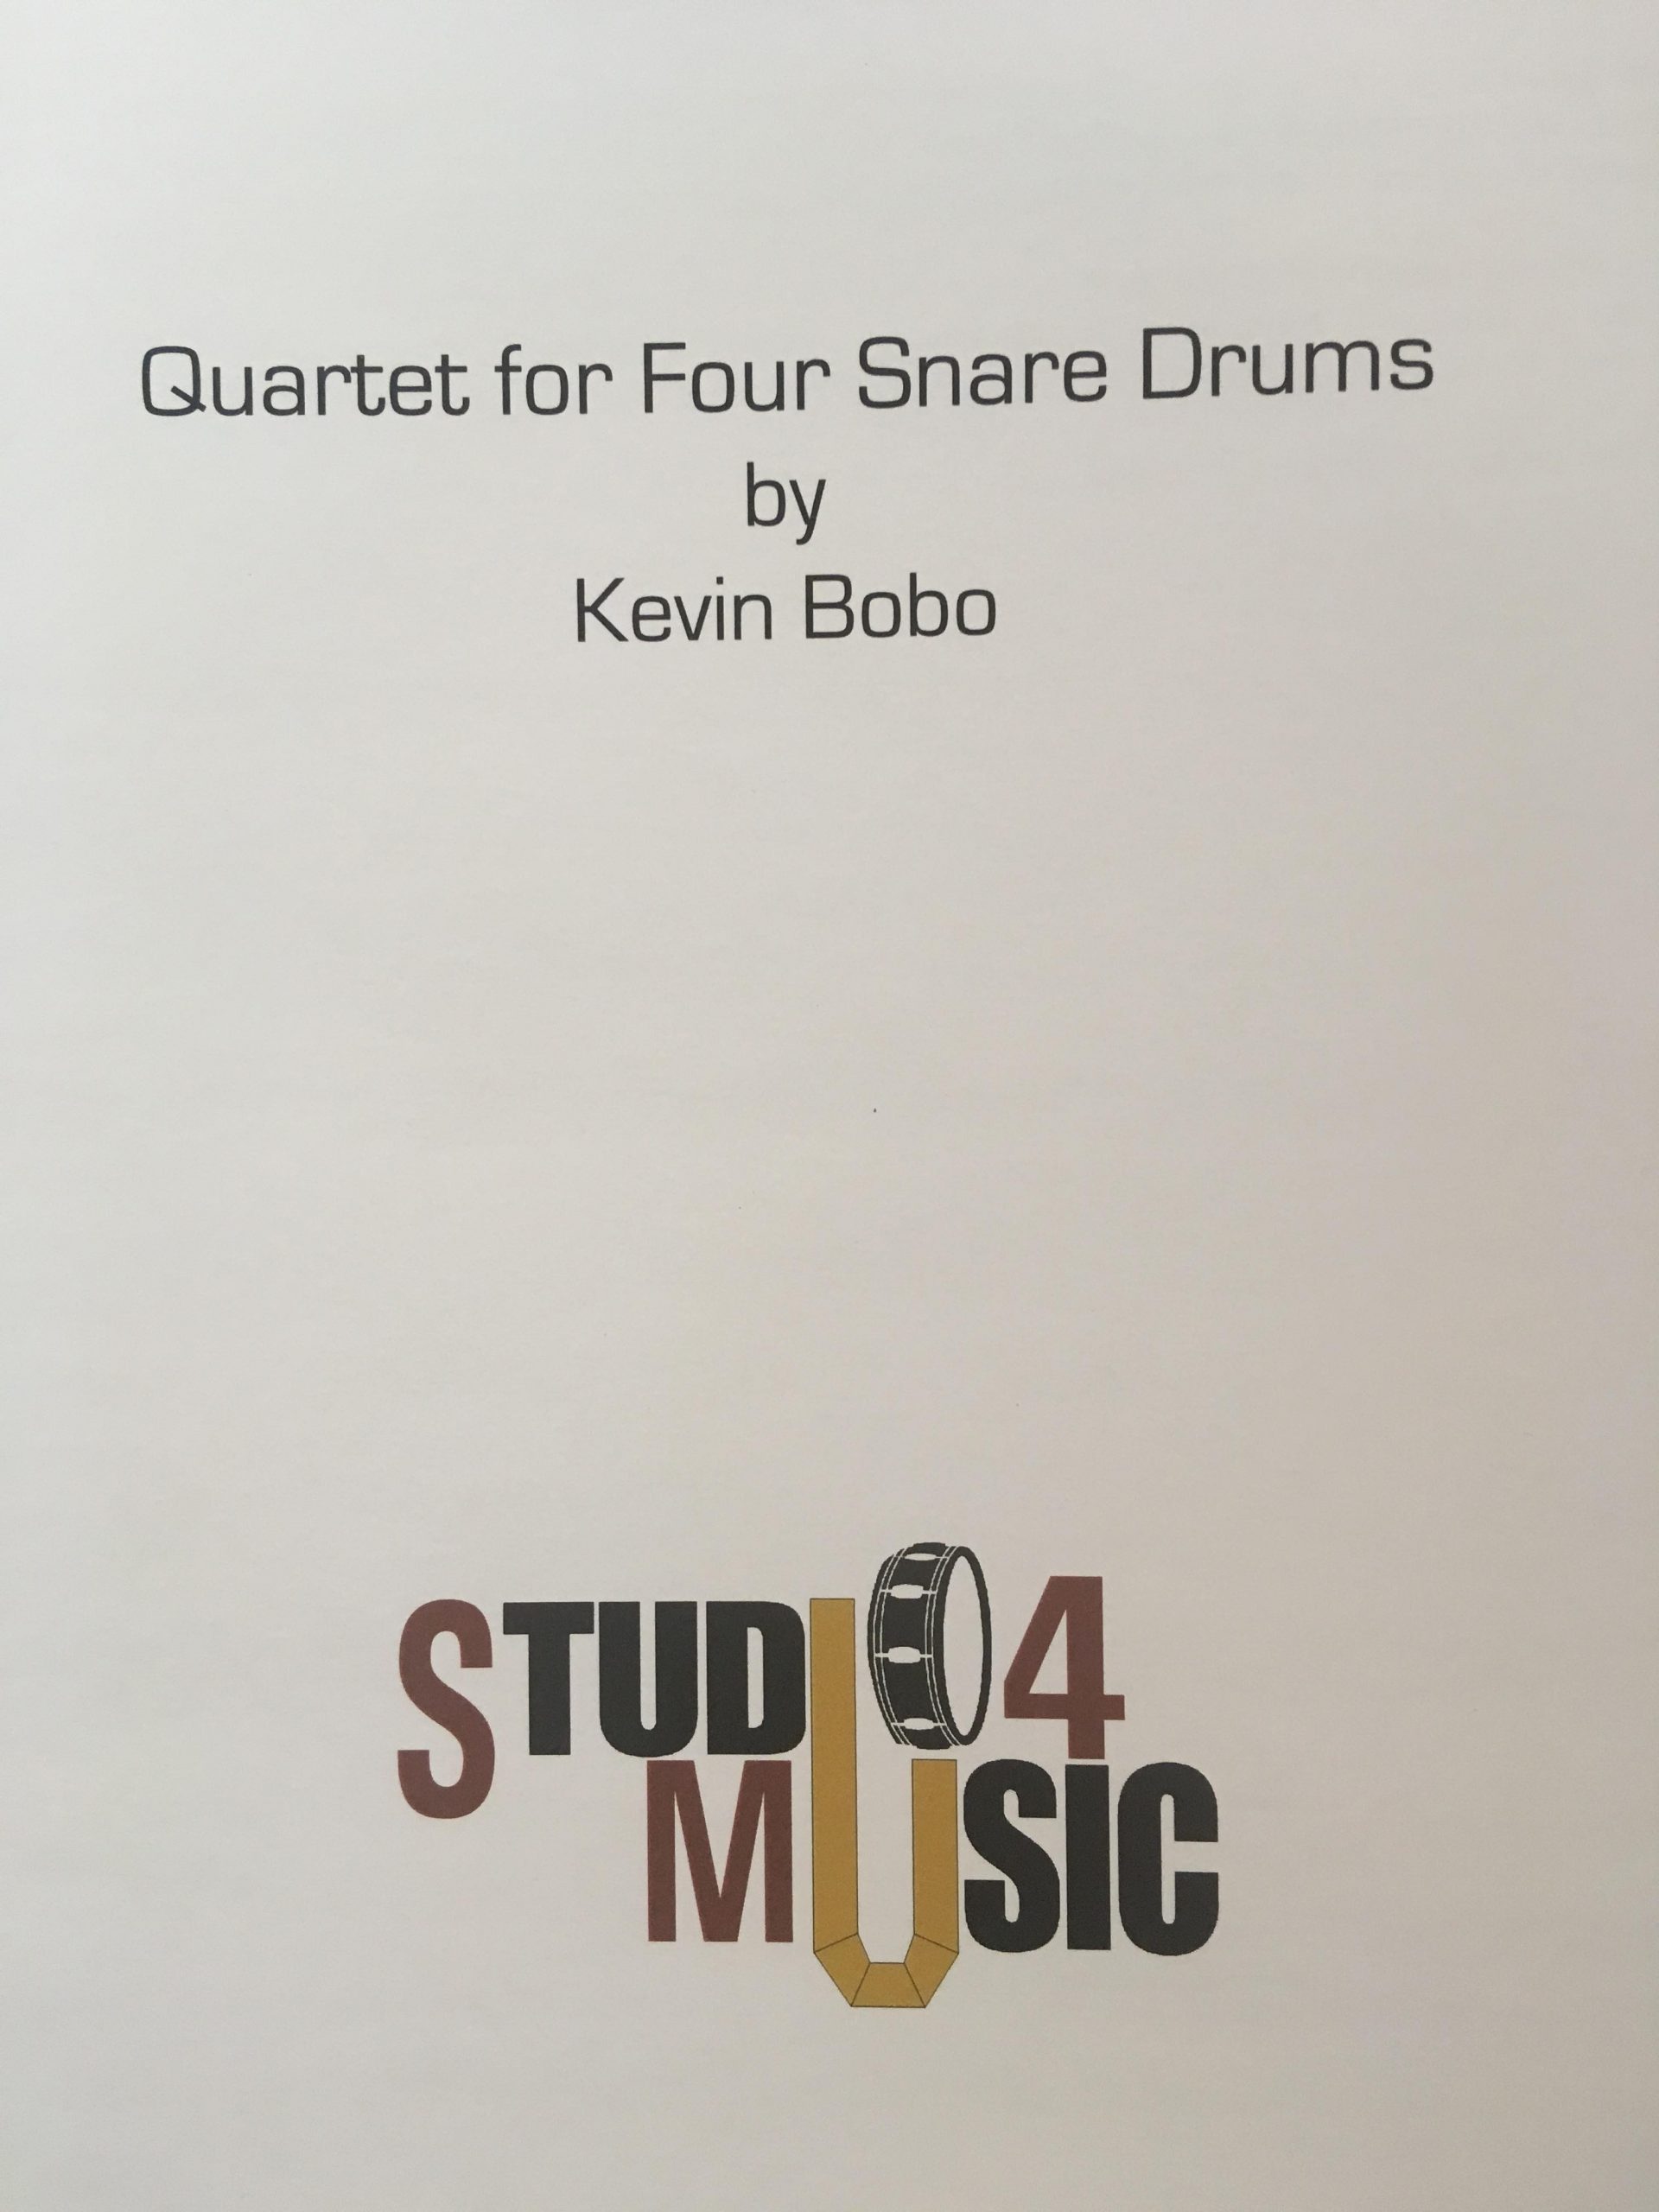 Quartet for Four Snare Drums by Kevin Bobo